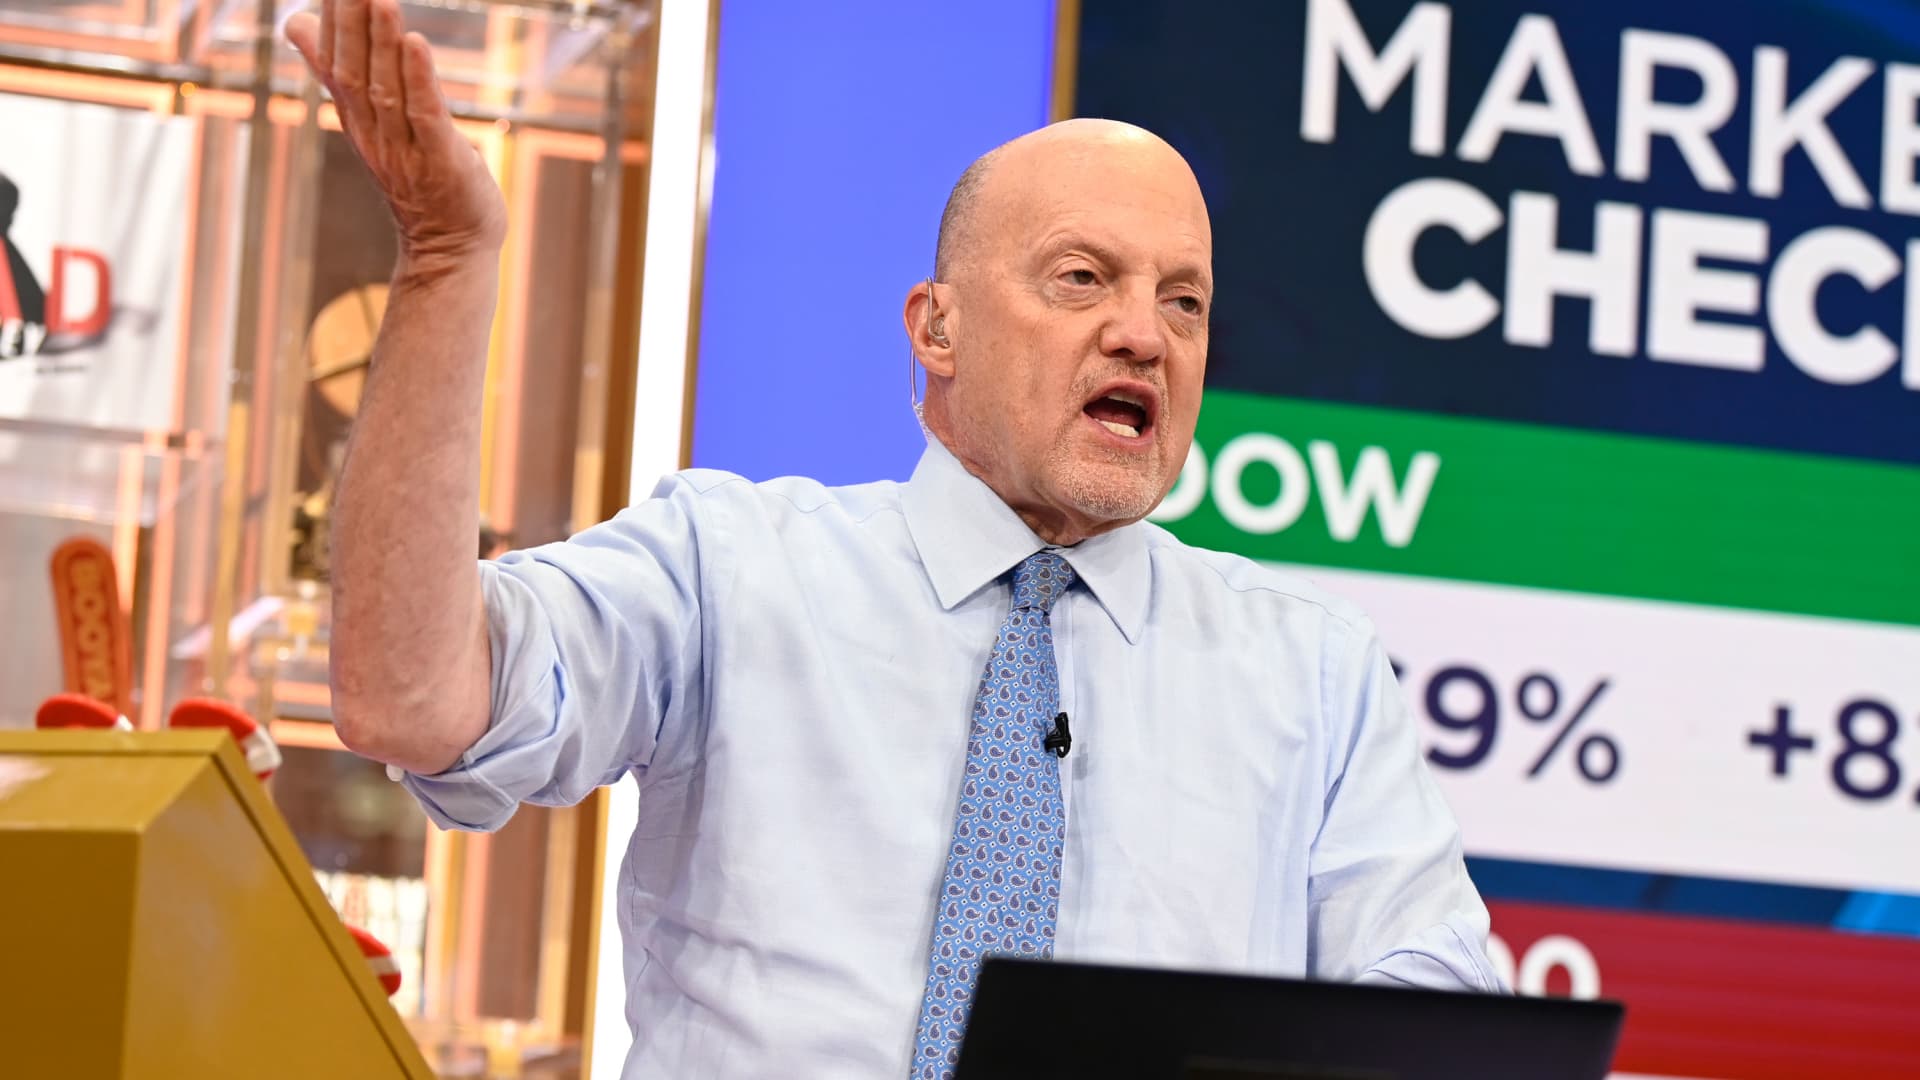 Jim Cramer says to avoid stocks in the ‘house of pain’ Nasdaq 100 index